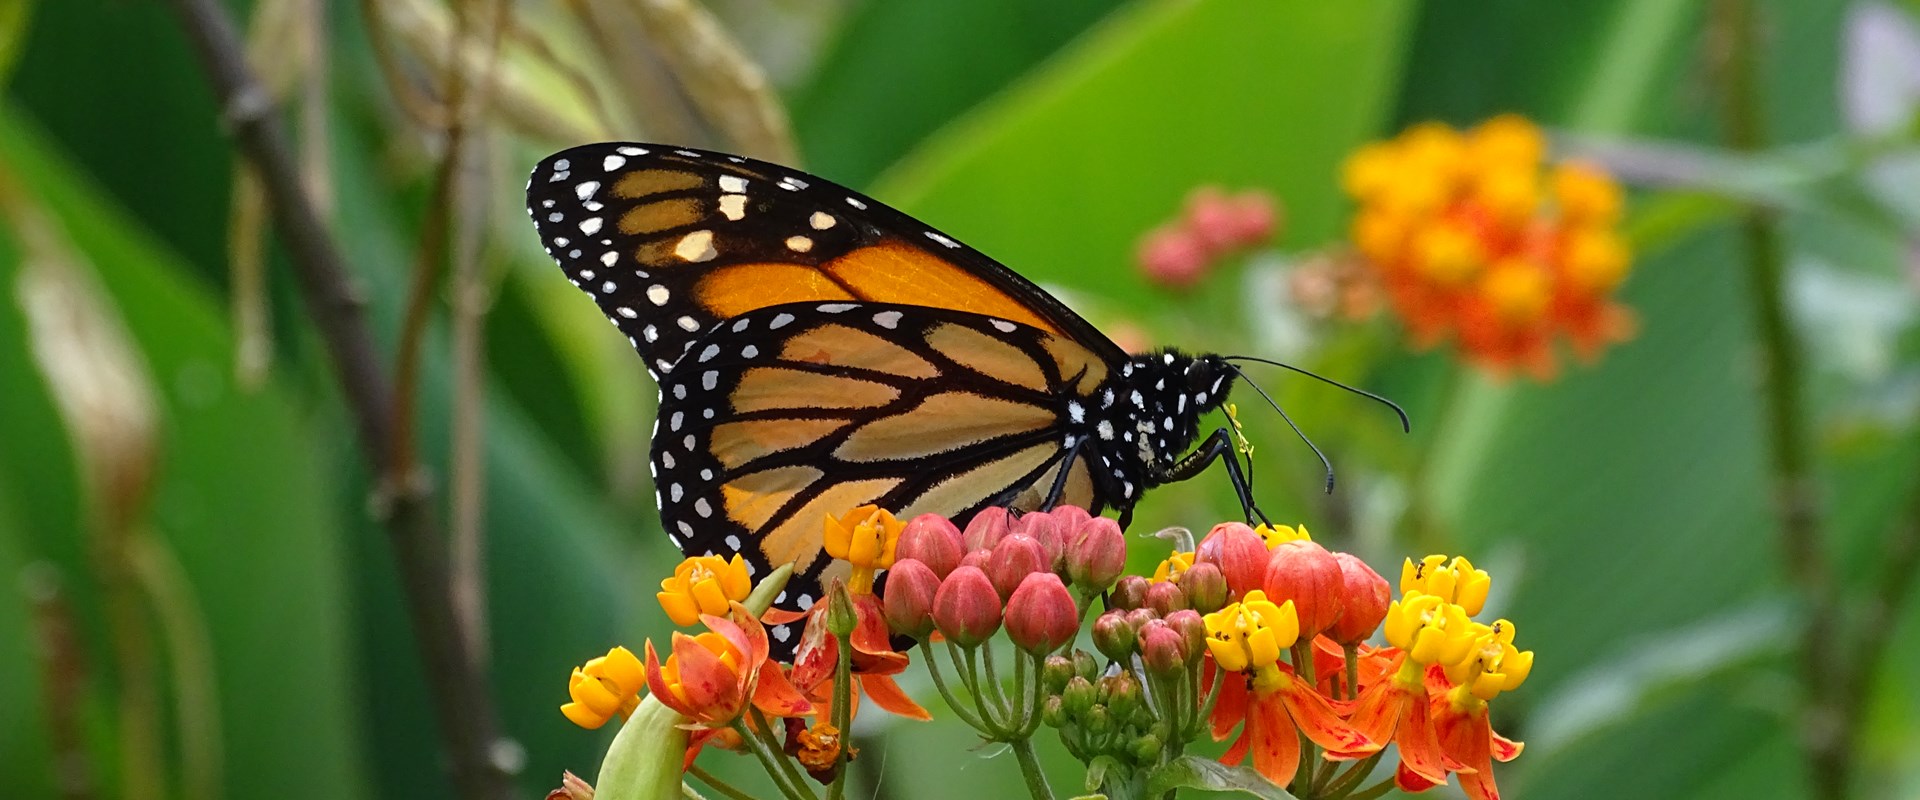 Monarch Butterfly Fact Sheet - Signs of the Seasons: A New England